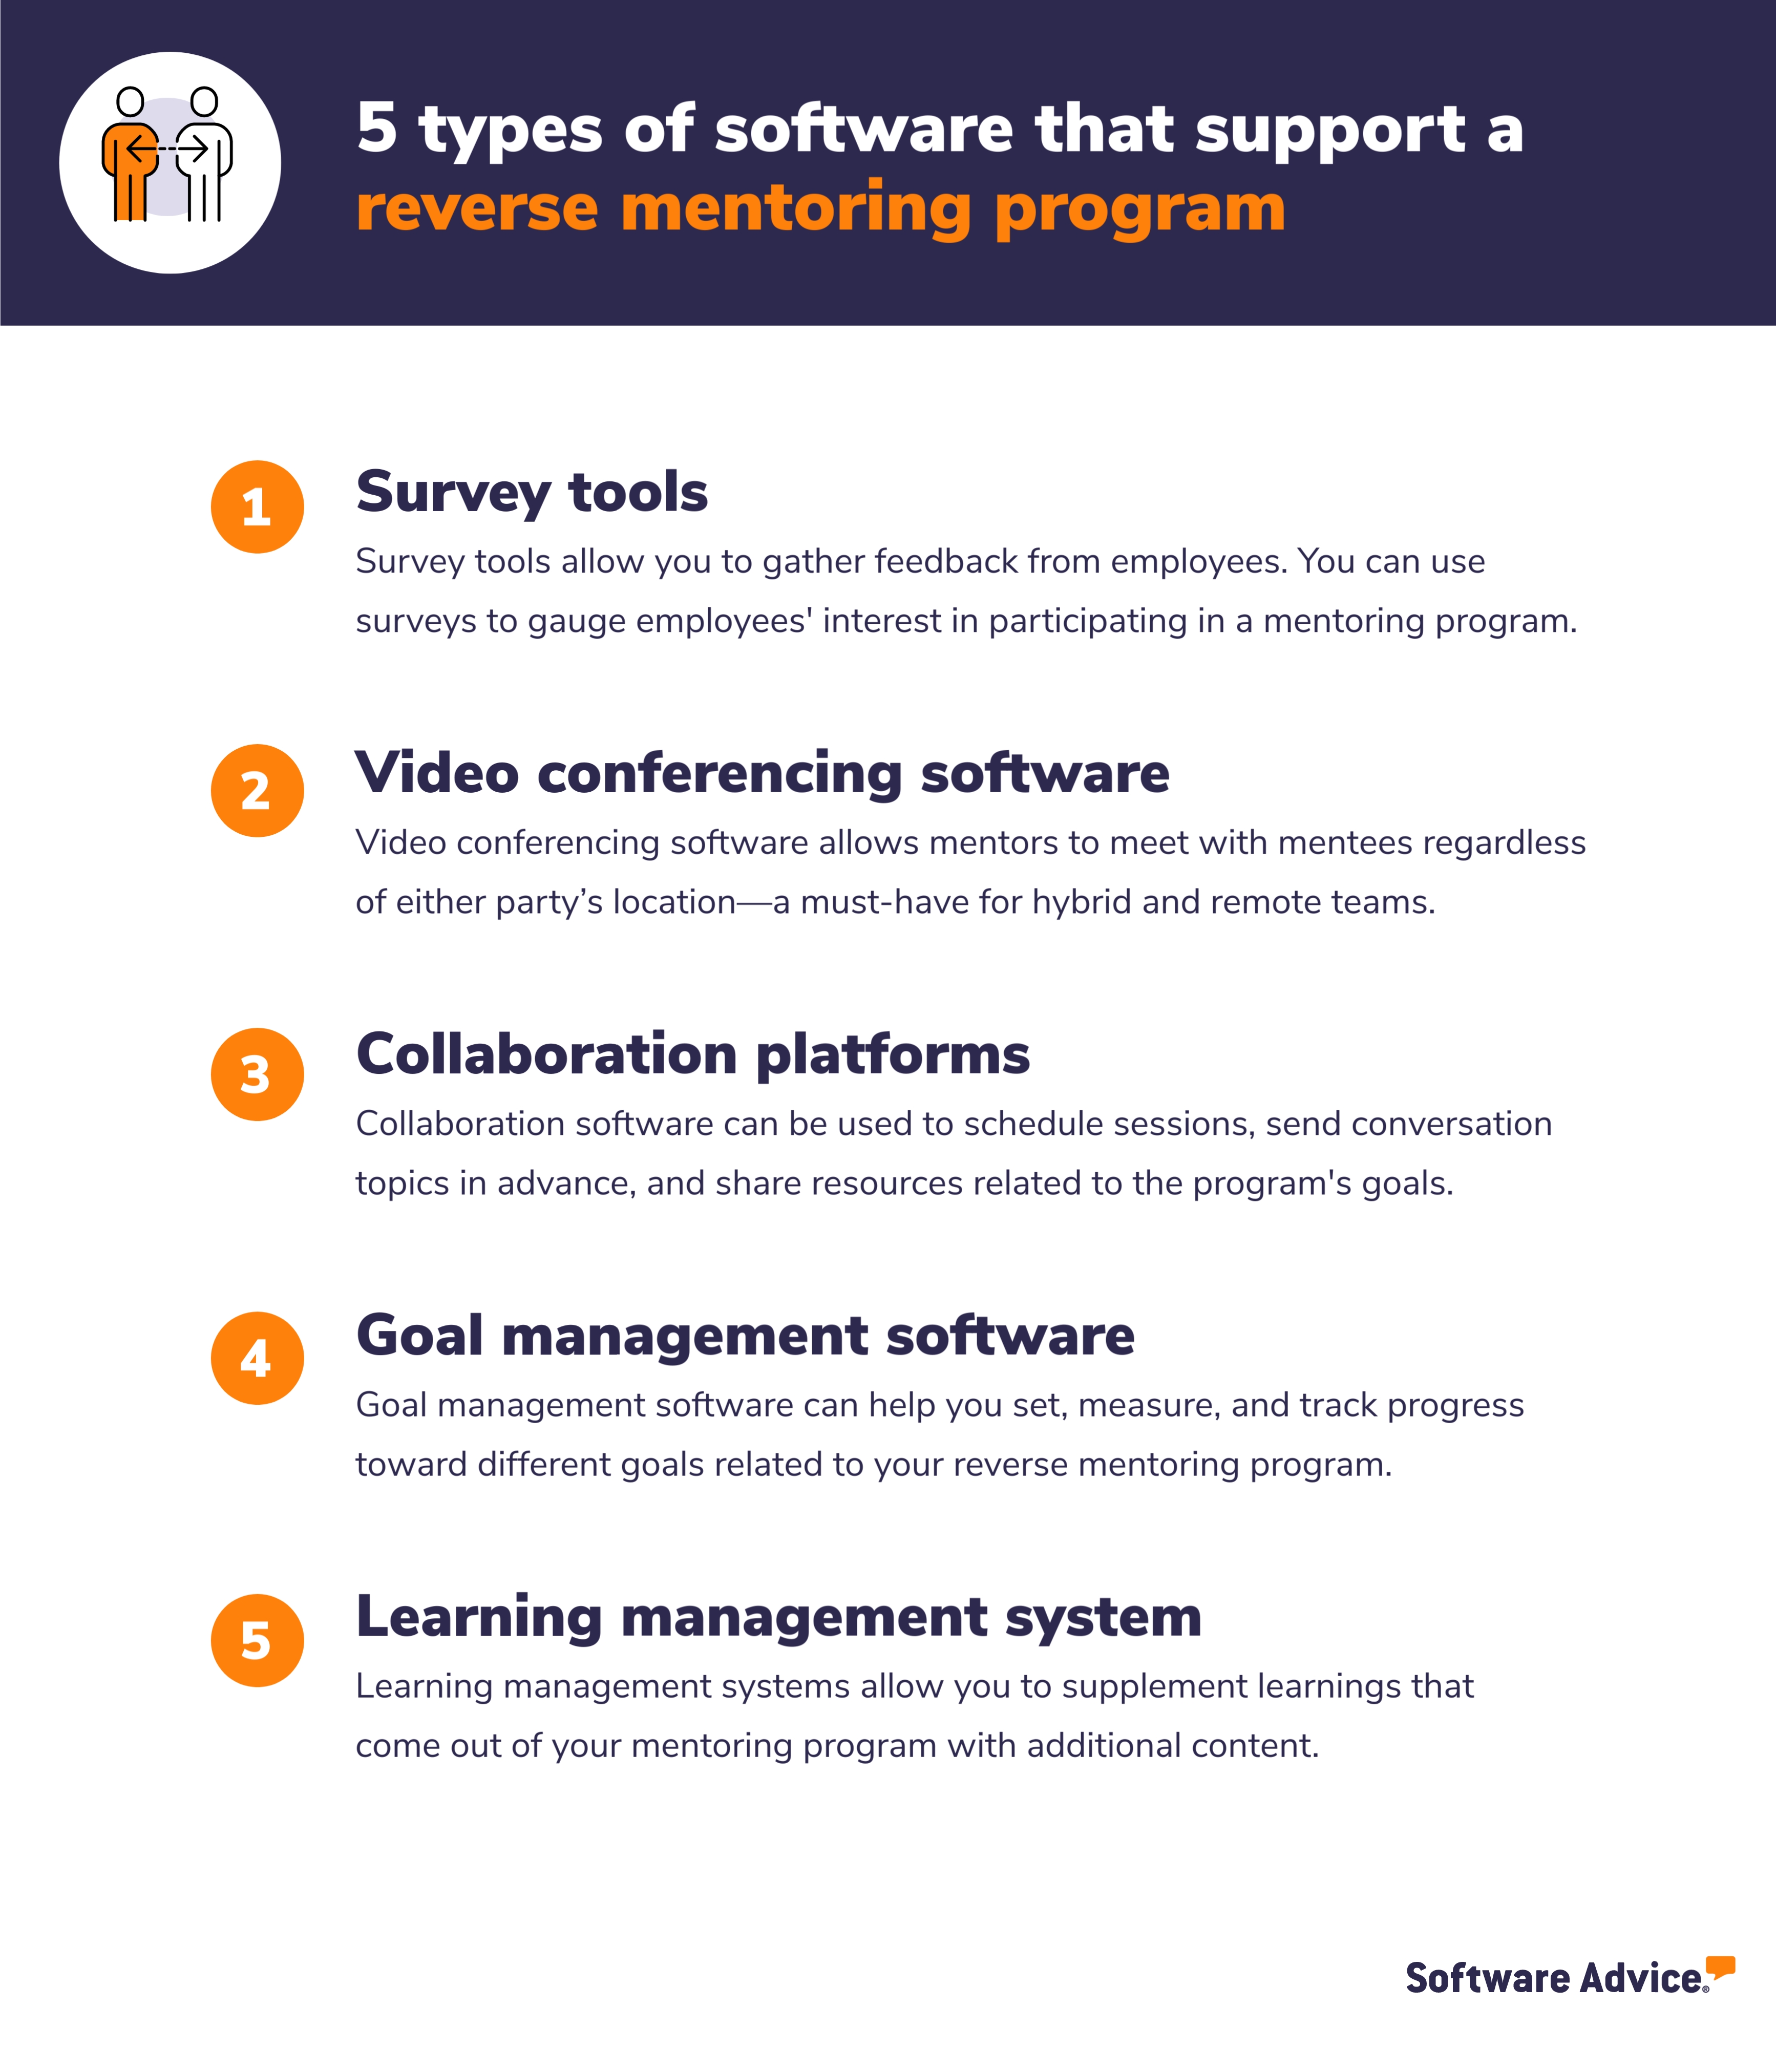 5 types of software that support a reverse mentoring program